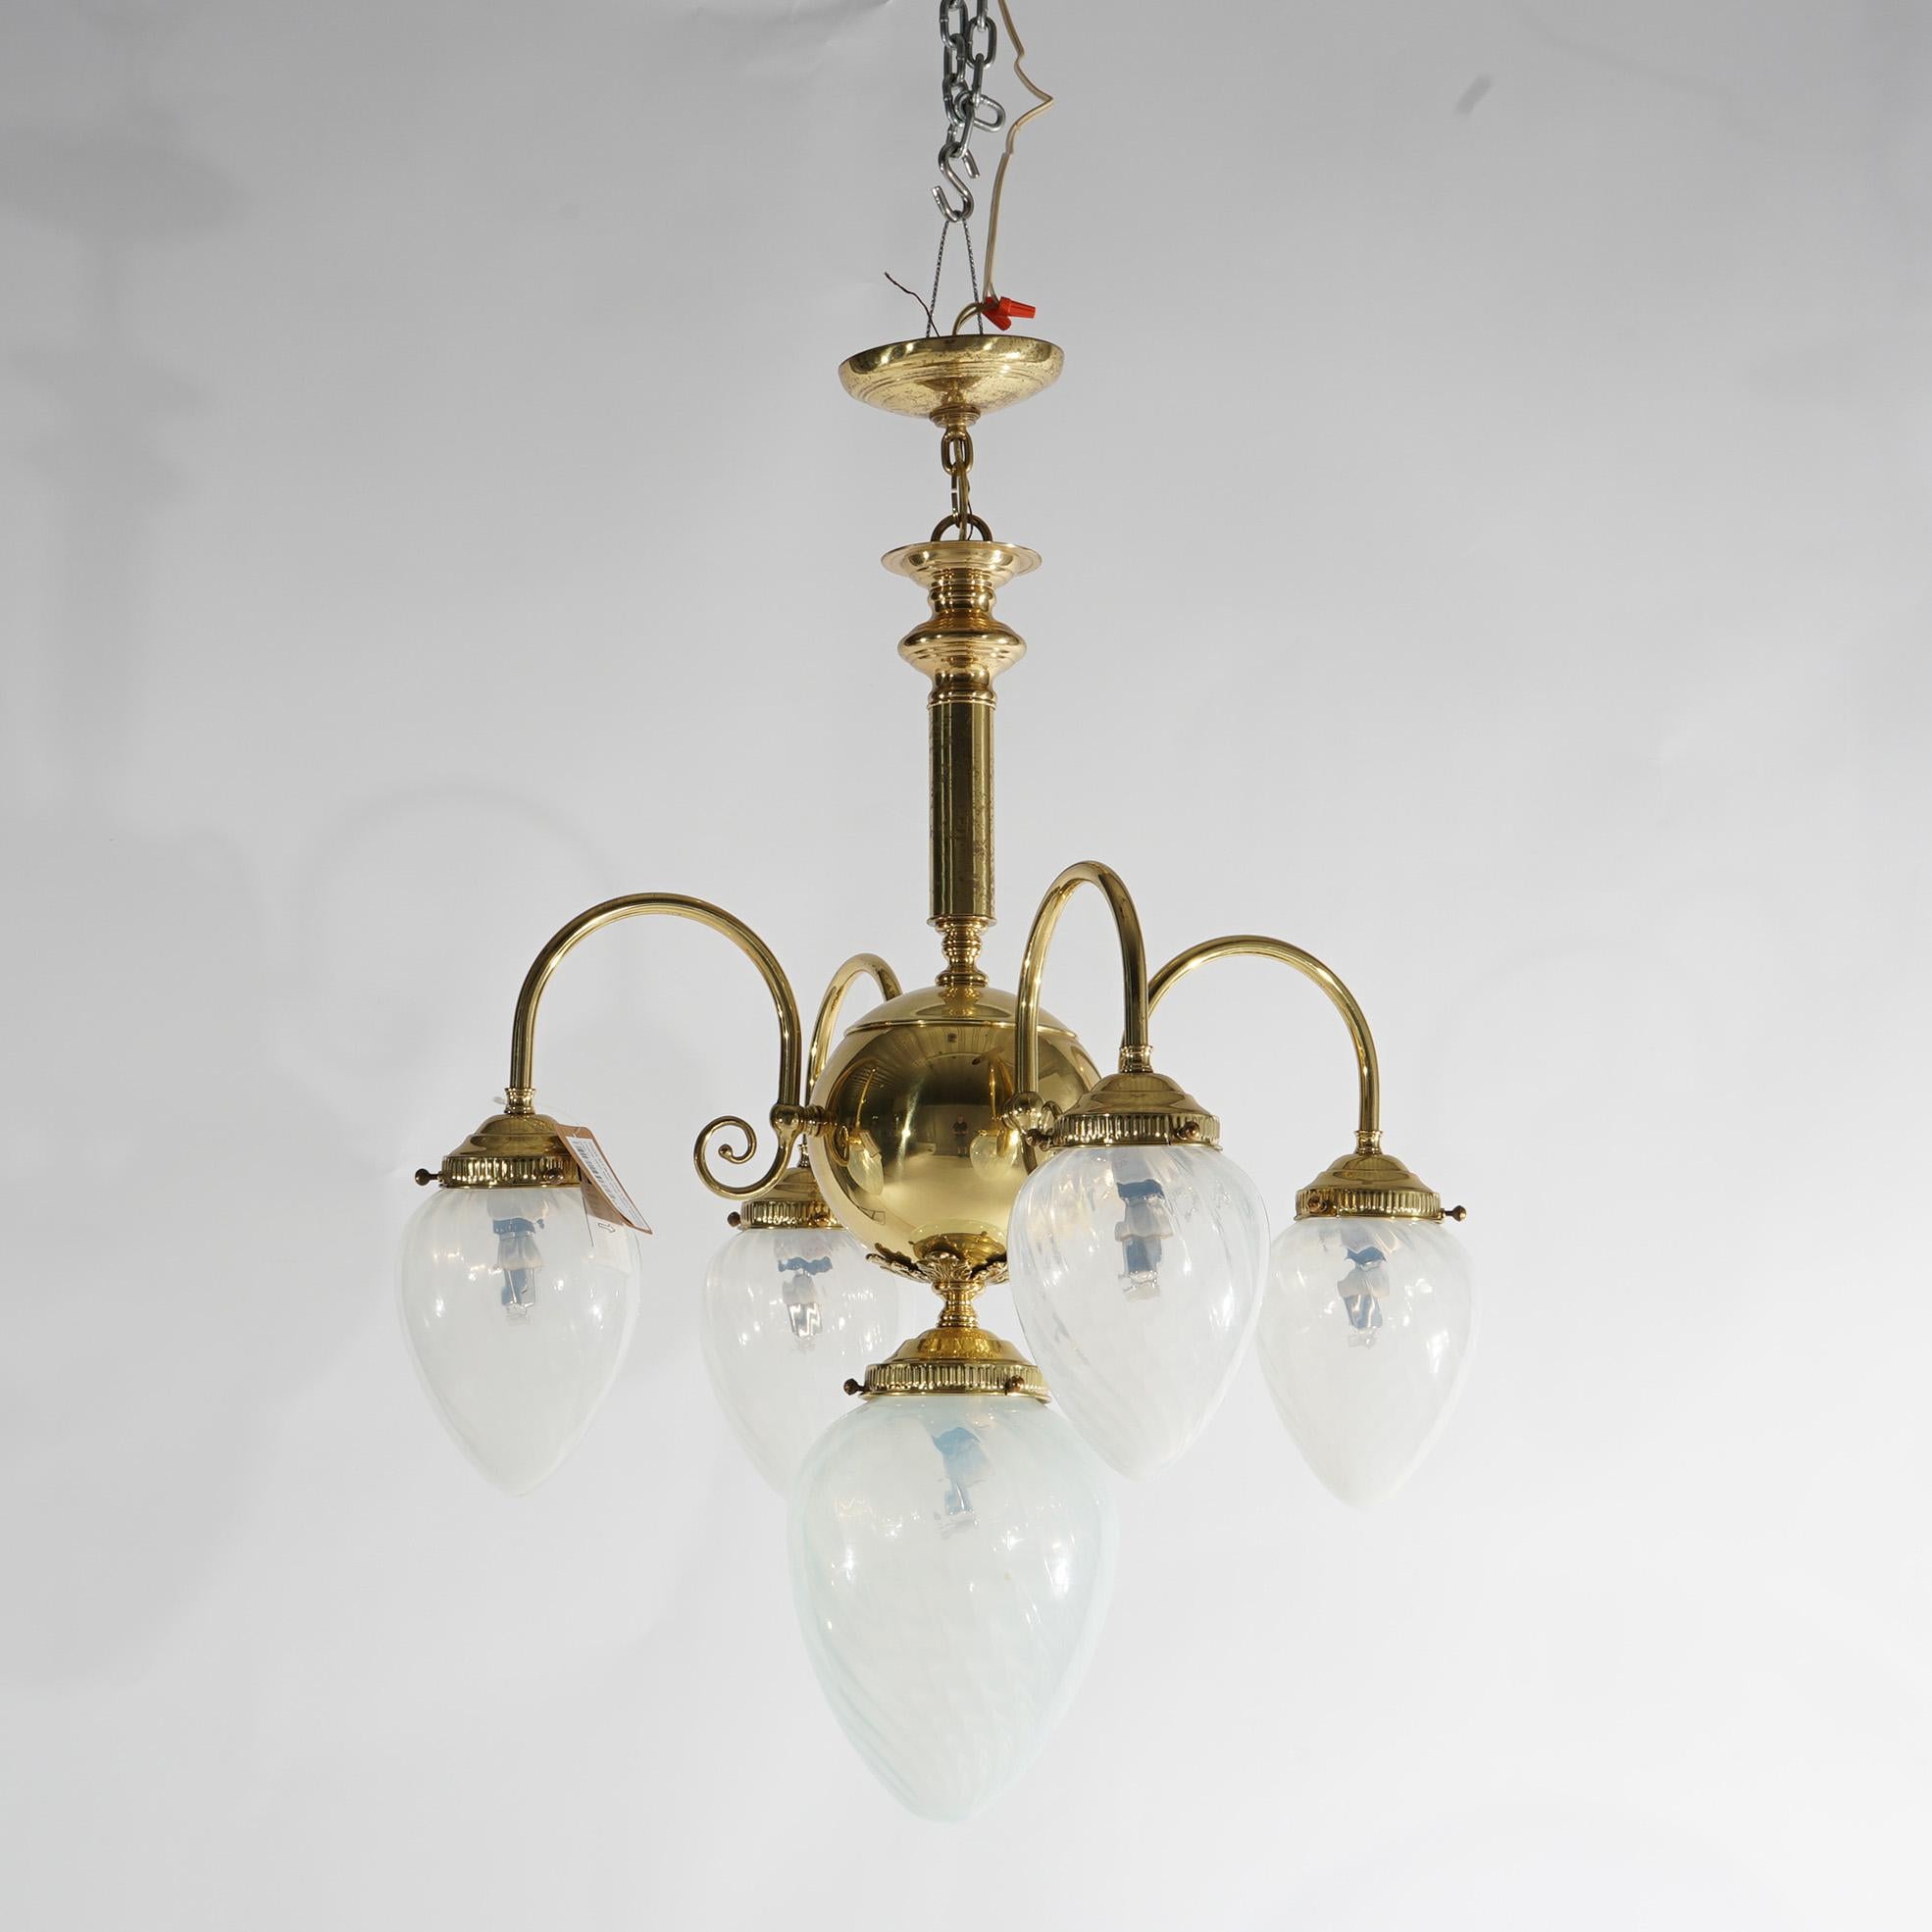 Brass Five-Light Hanging Fixture with Tear Drop Swirl Glass Shades 20th C In Good Condition For Sale In Big Flats, NY